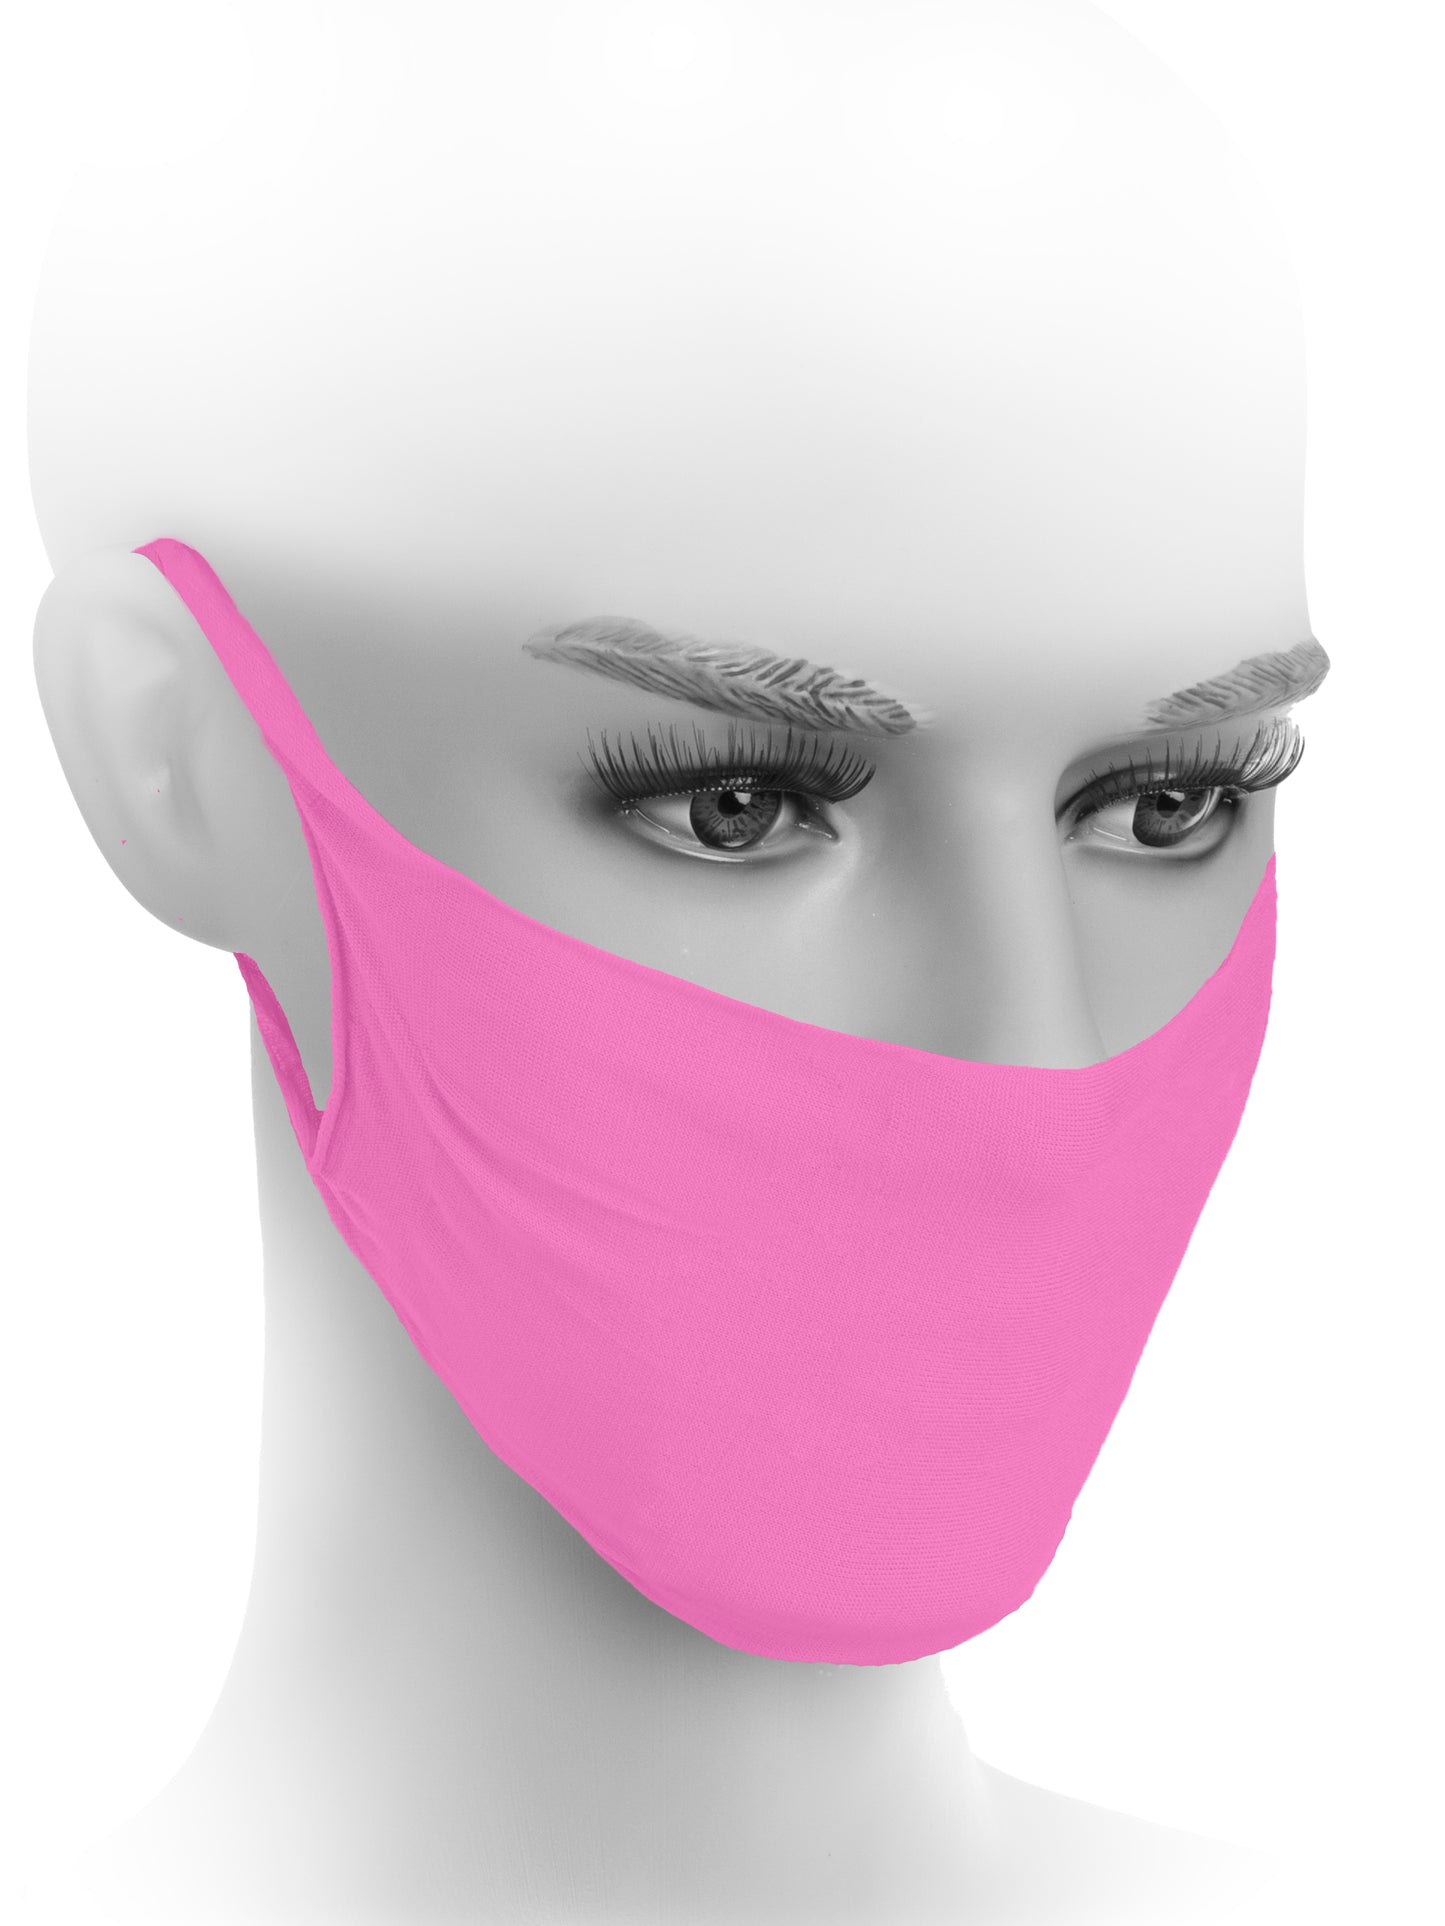 Fiore Hygiene Face Mask M0001 - face covering in bright neon pink